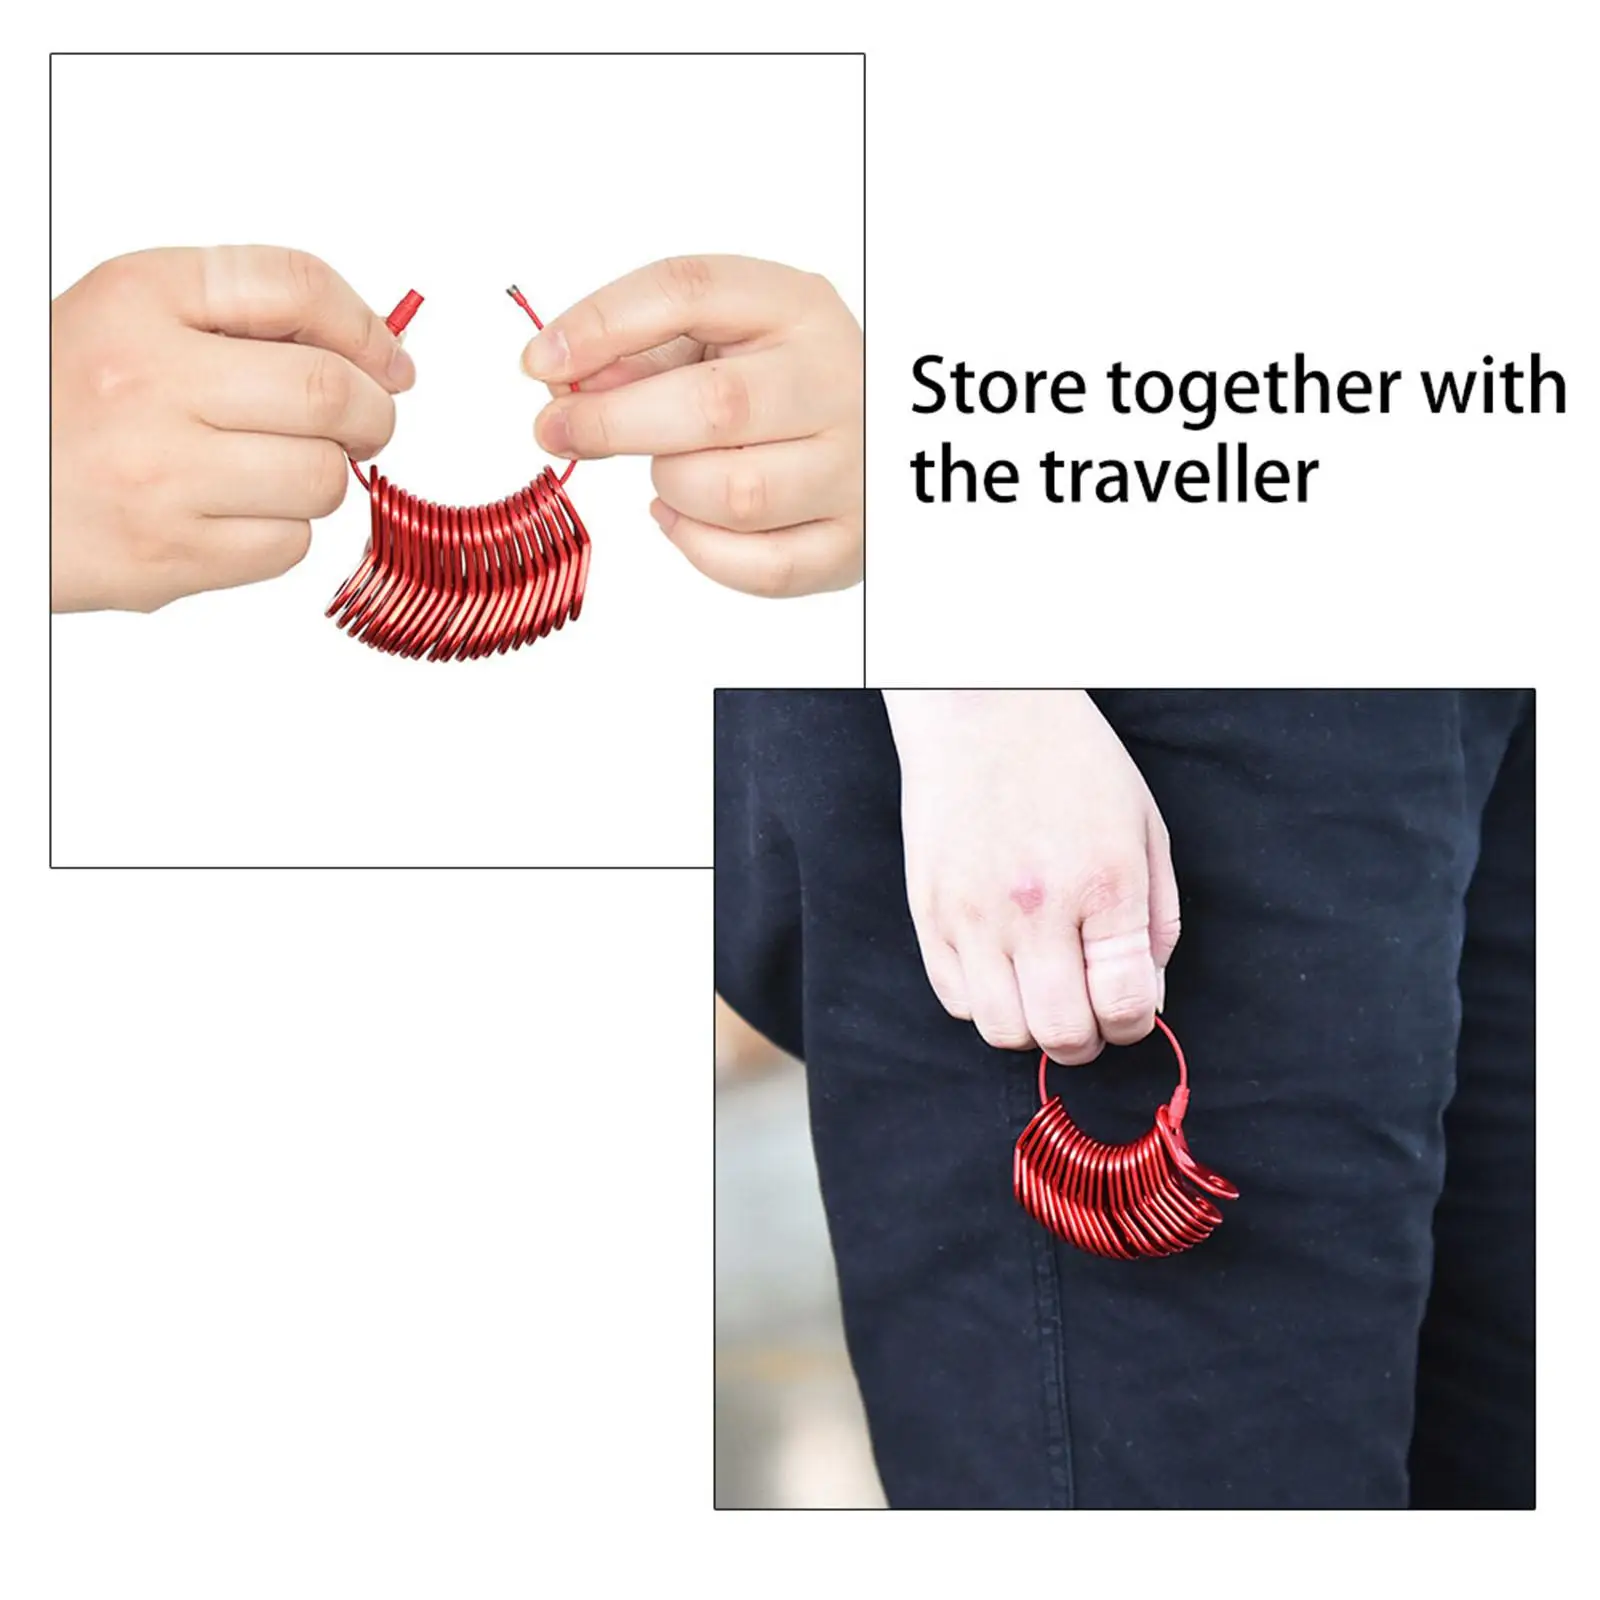 20 Pcs Tent Buckle Rope Tightener Tent Accessory Rope Adjuster Buckle for Outdoor Canopy Tent